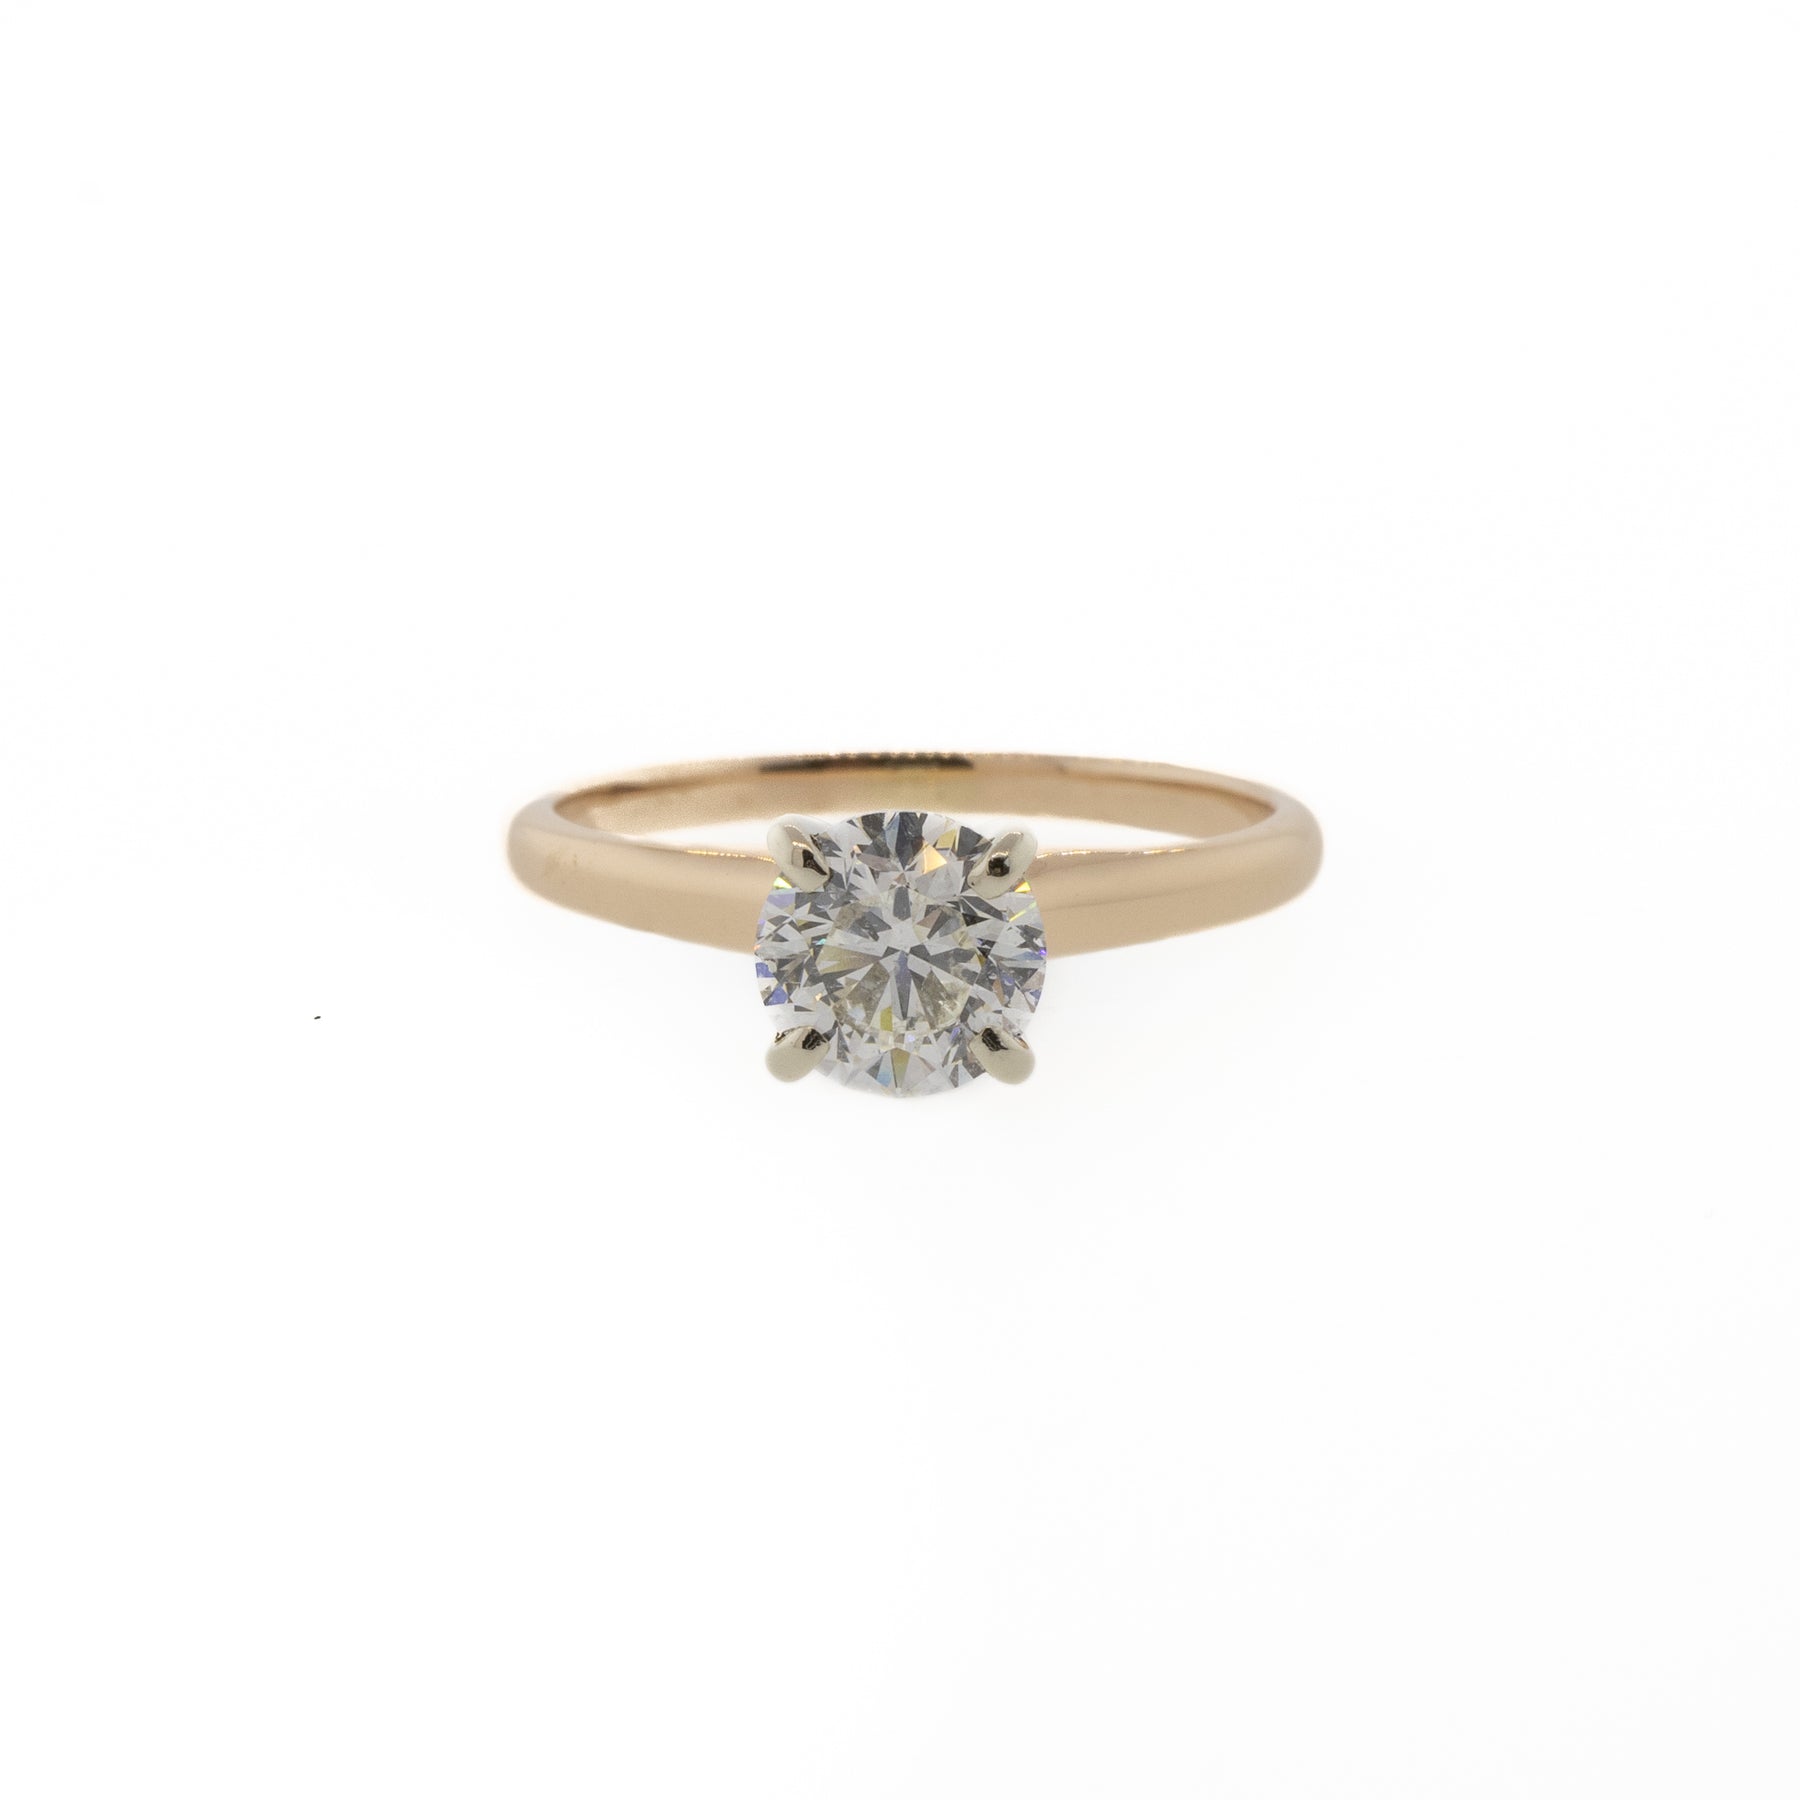 Rose and White Gold Round Diamond Solitaire Ring